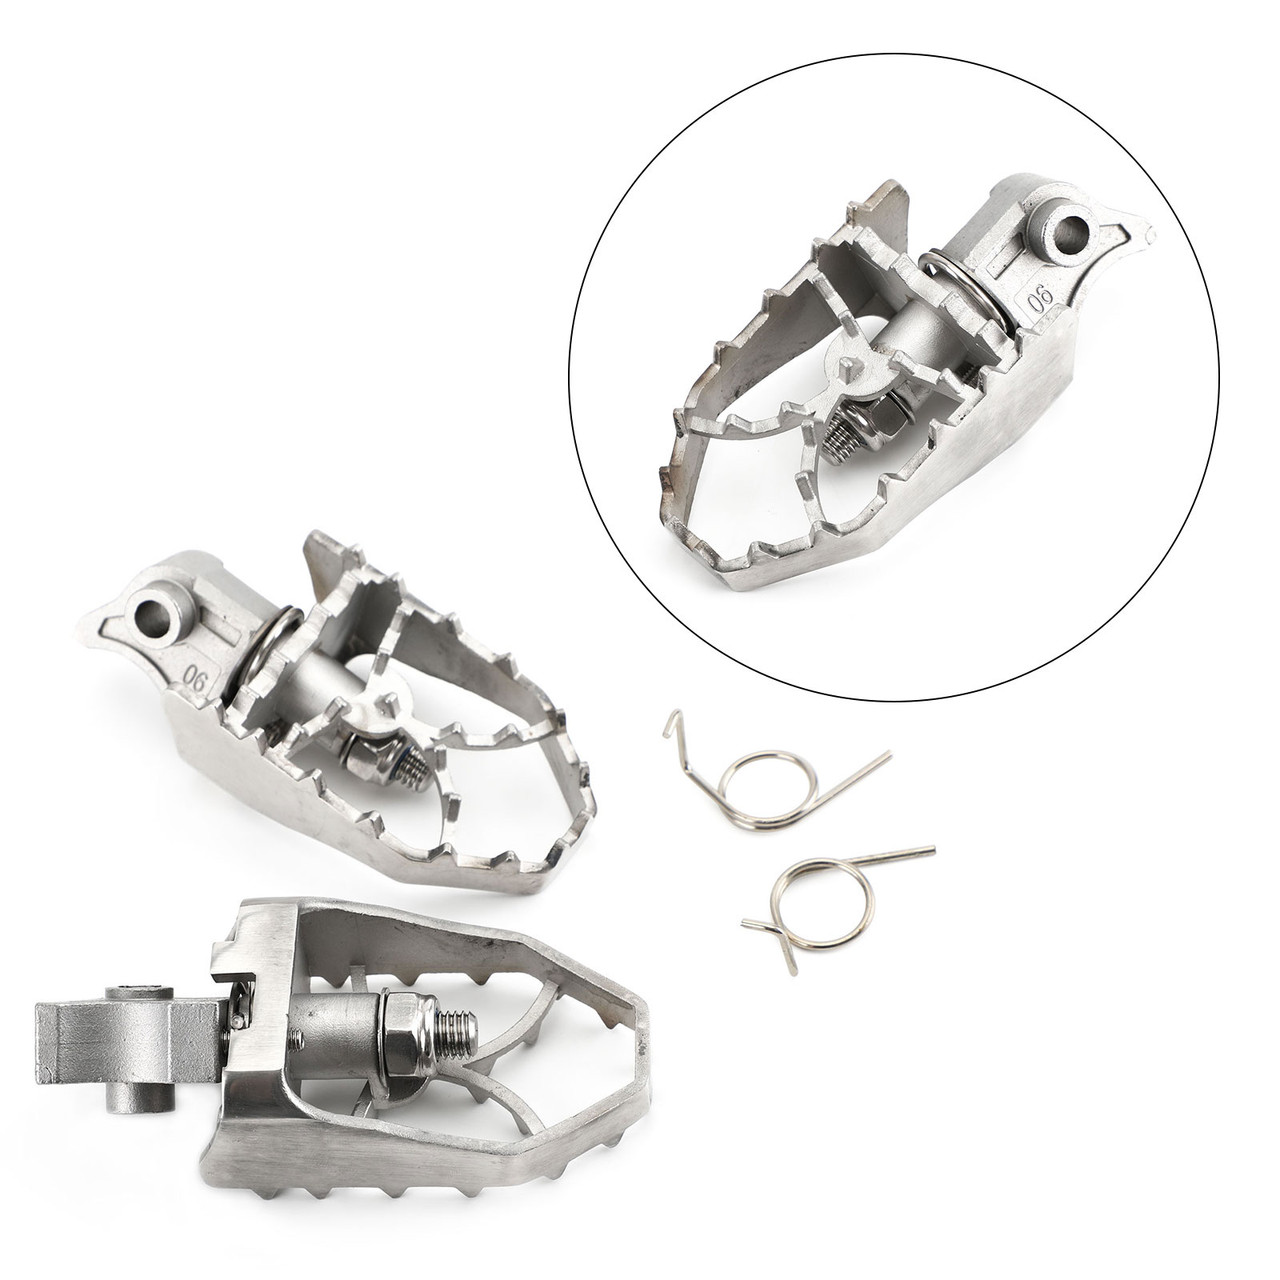 Adjustable Rotatable Front Footpegs Fit For BMW R1200GS GSA 13-19 F750GS F850GS 17-21